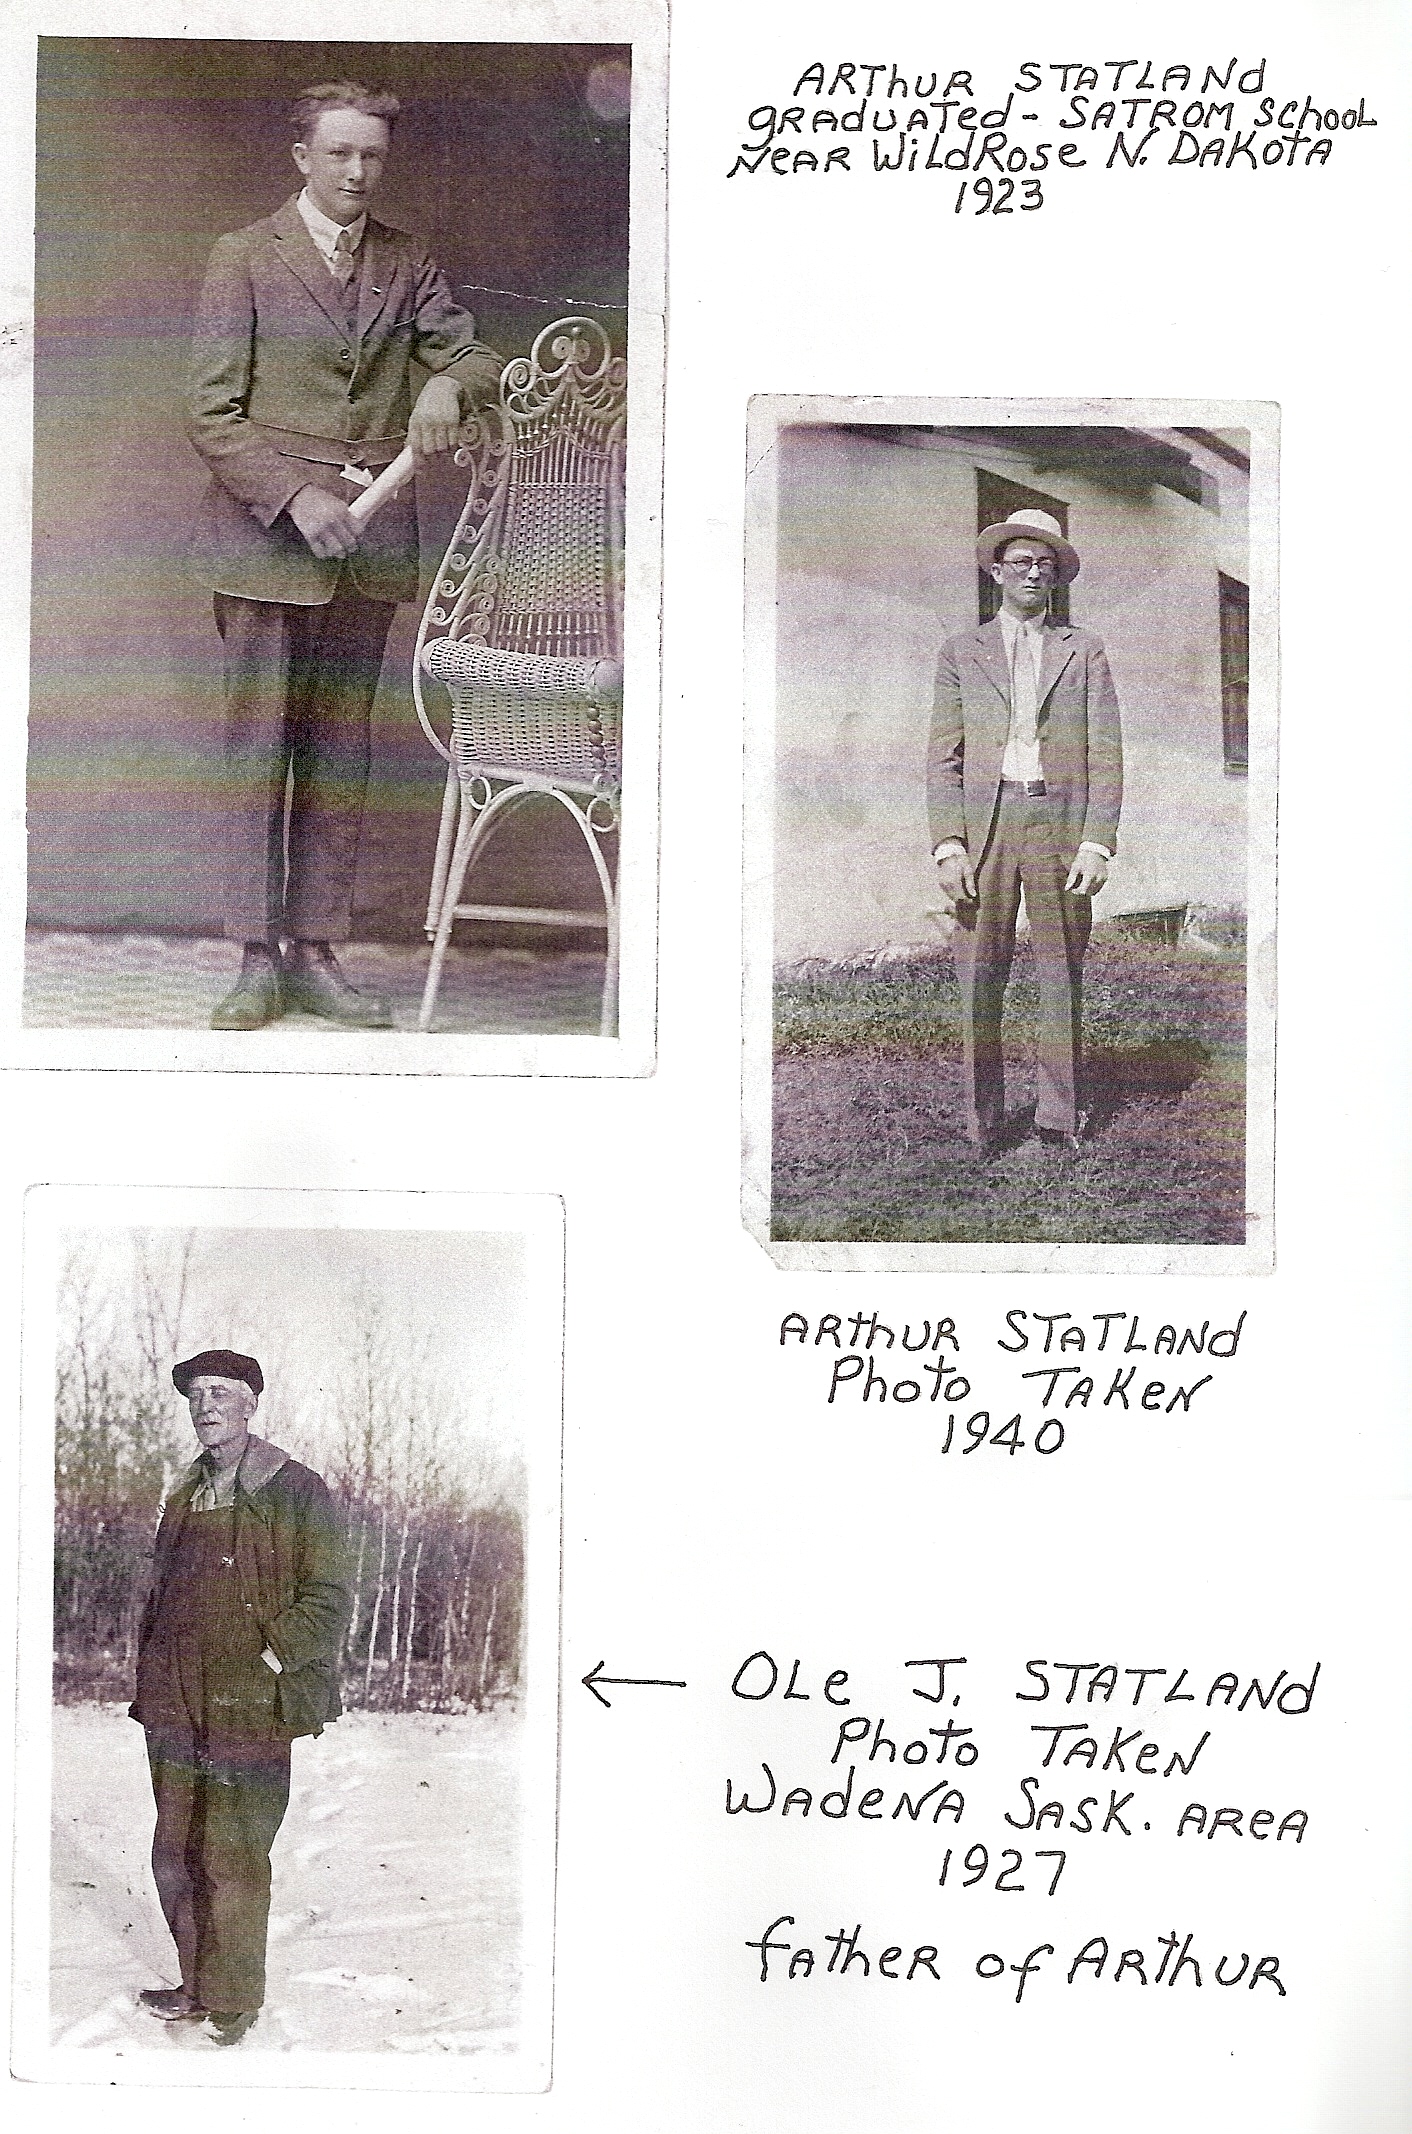 Arther and Ole Statland (father and son)